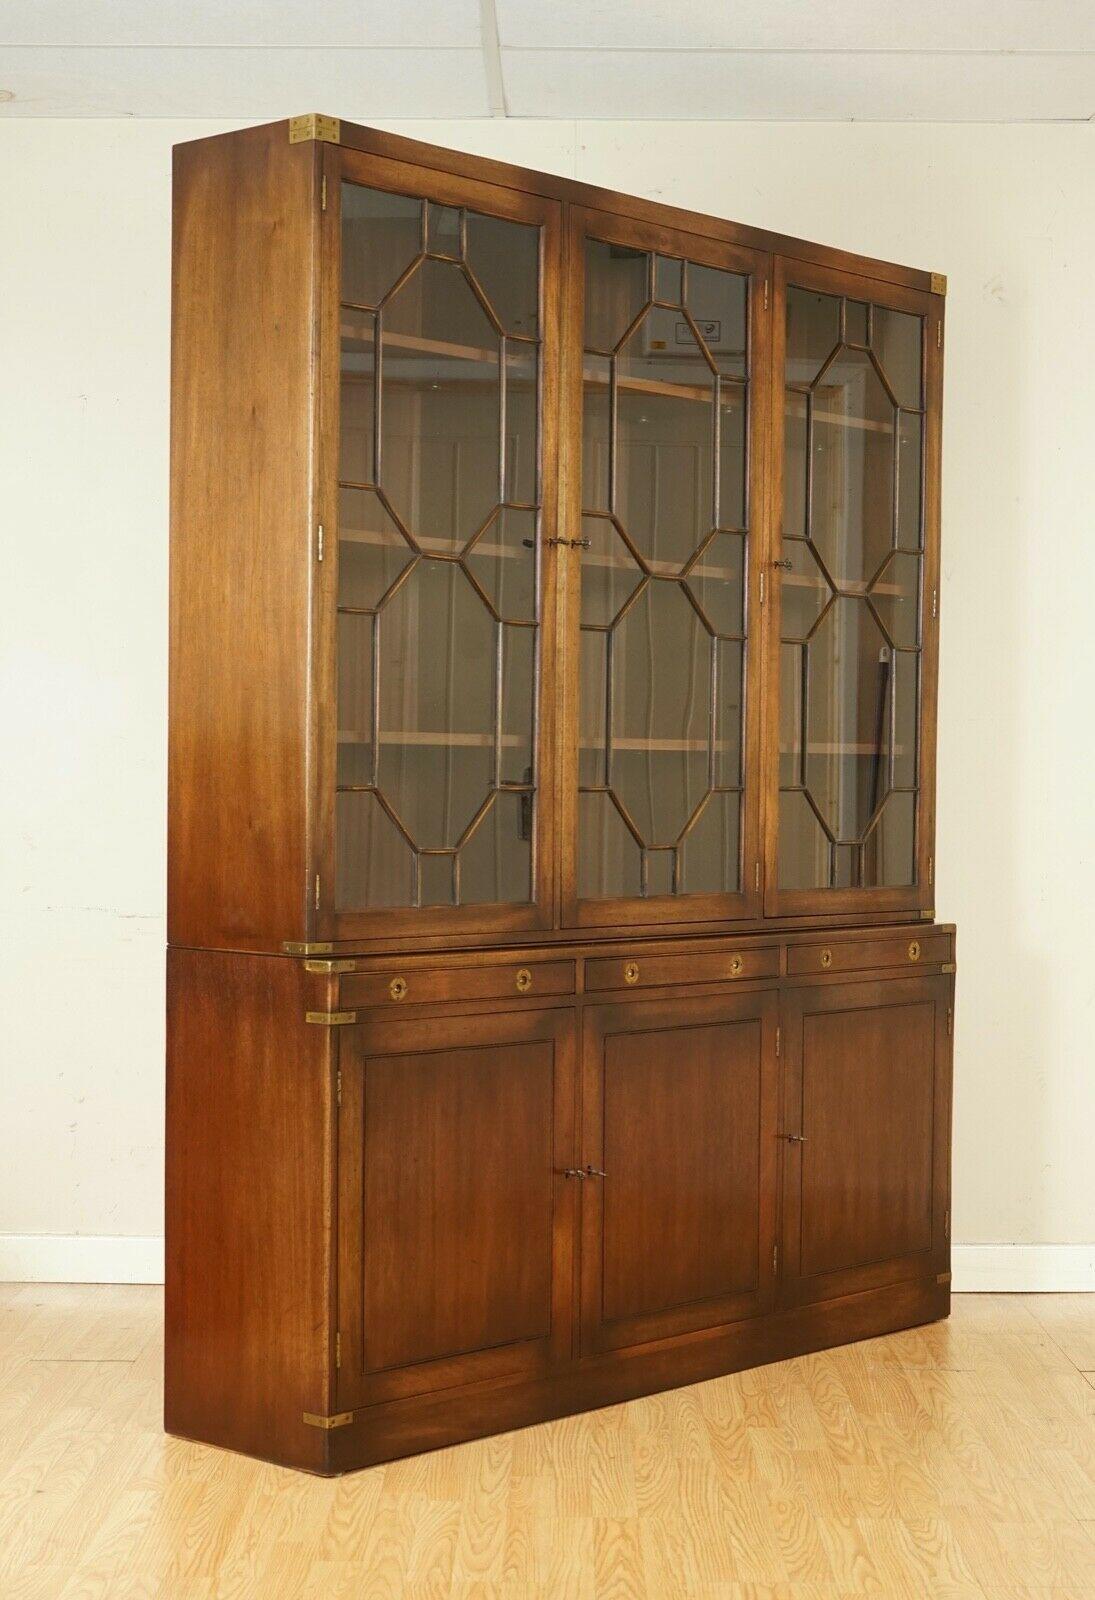 Hand-Crafted Kennedy for Harrods London Astral Glazed Campaign Library Bookcase Leather Desk